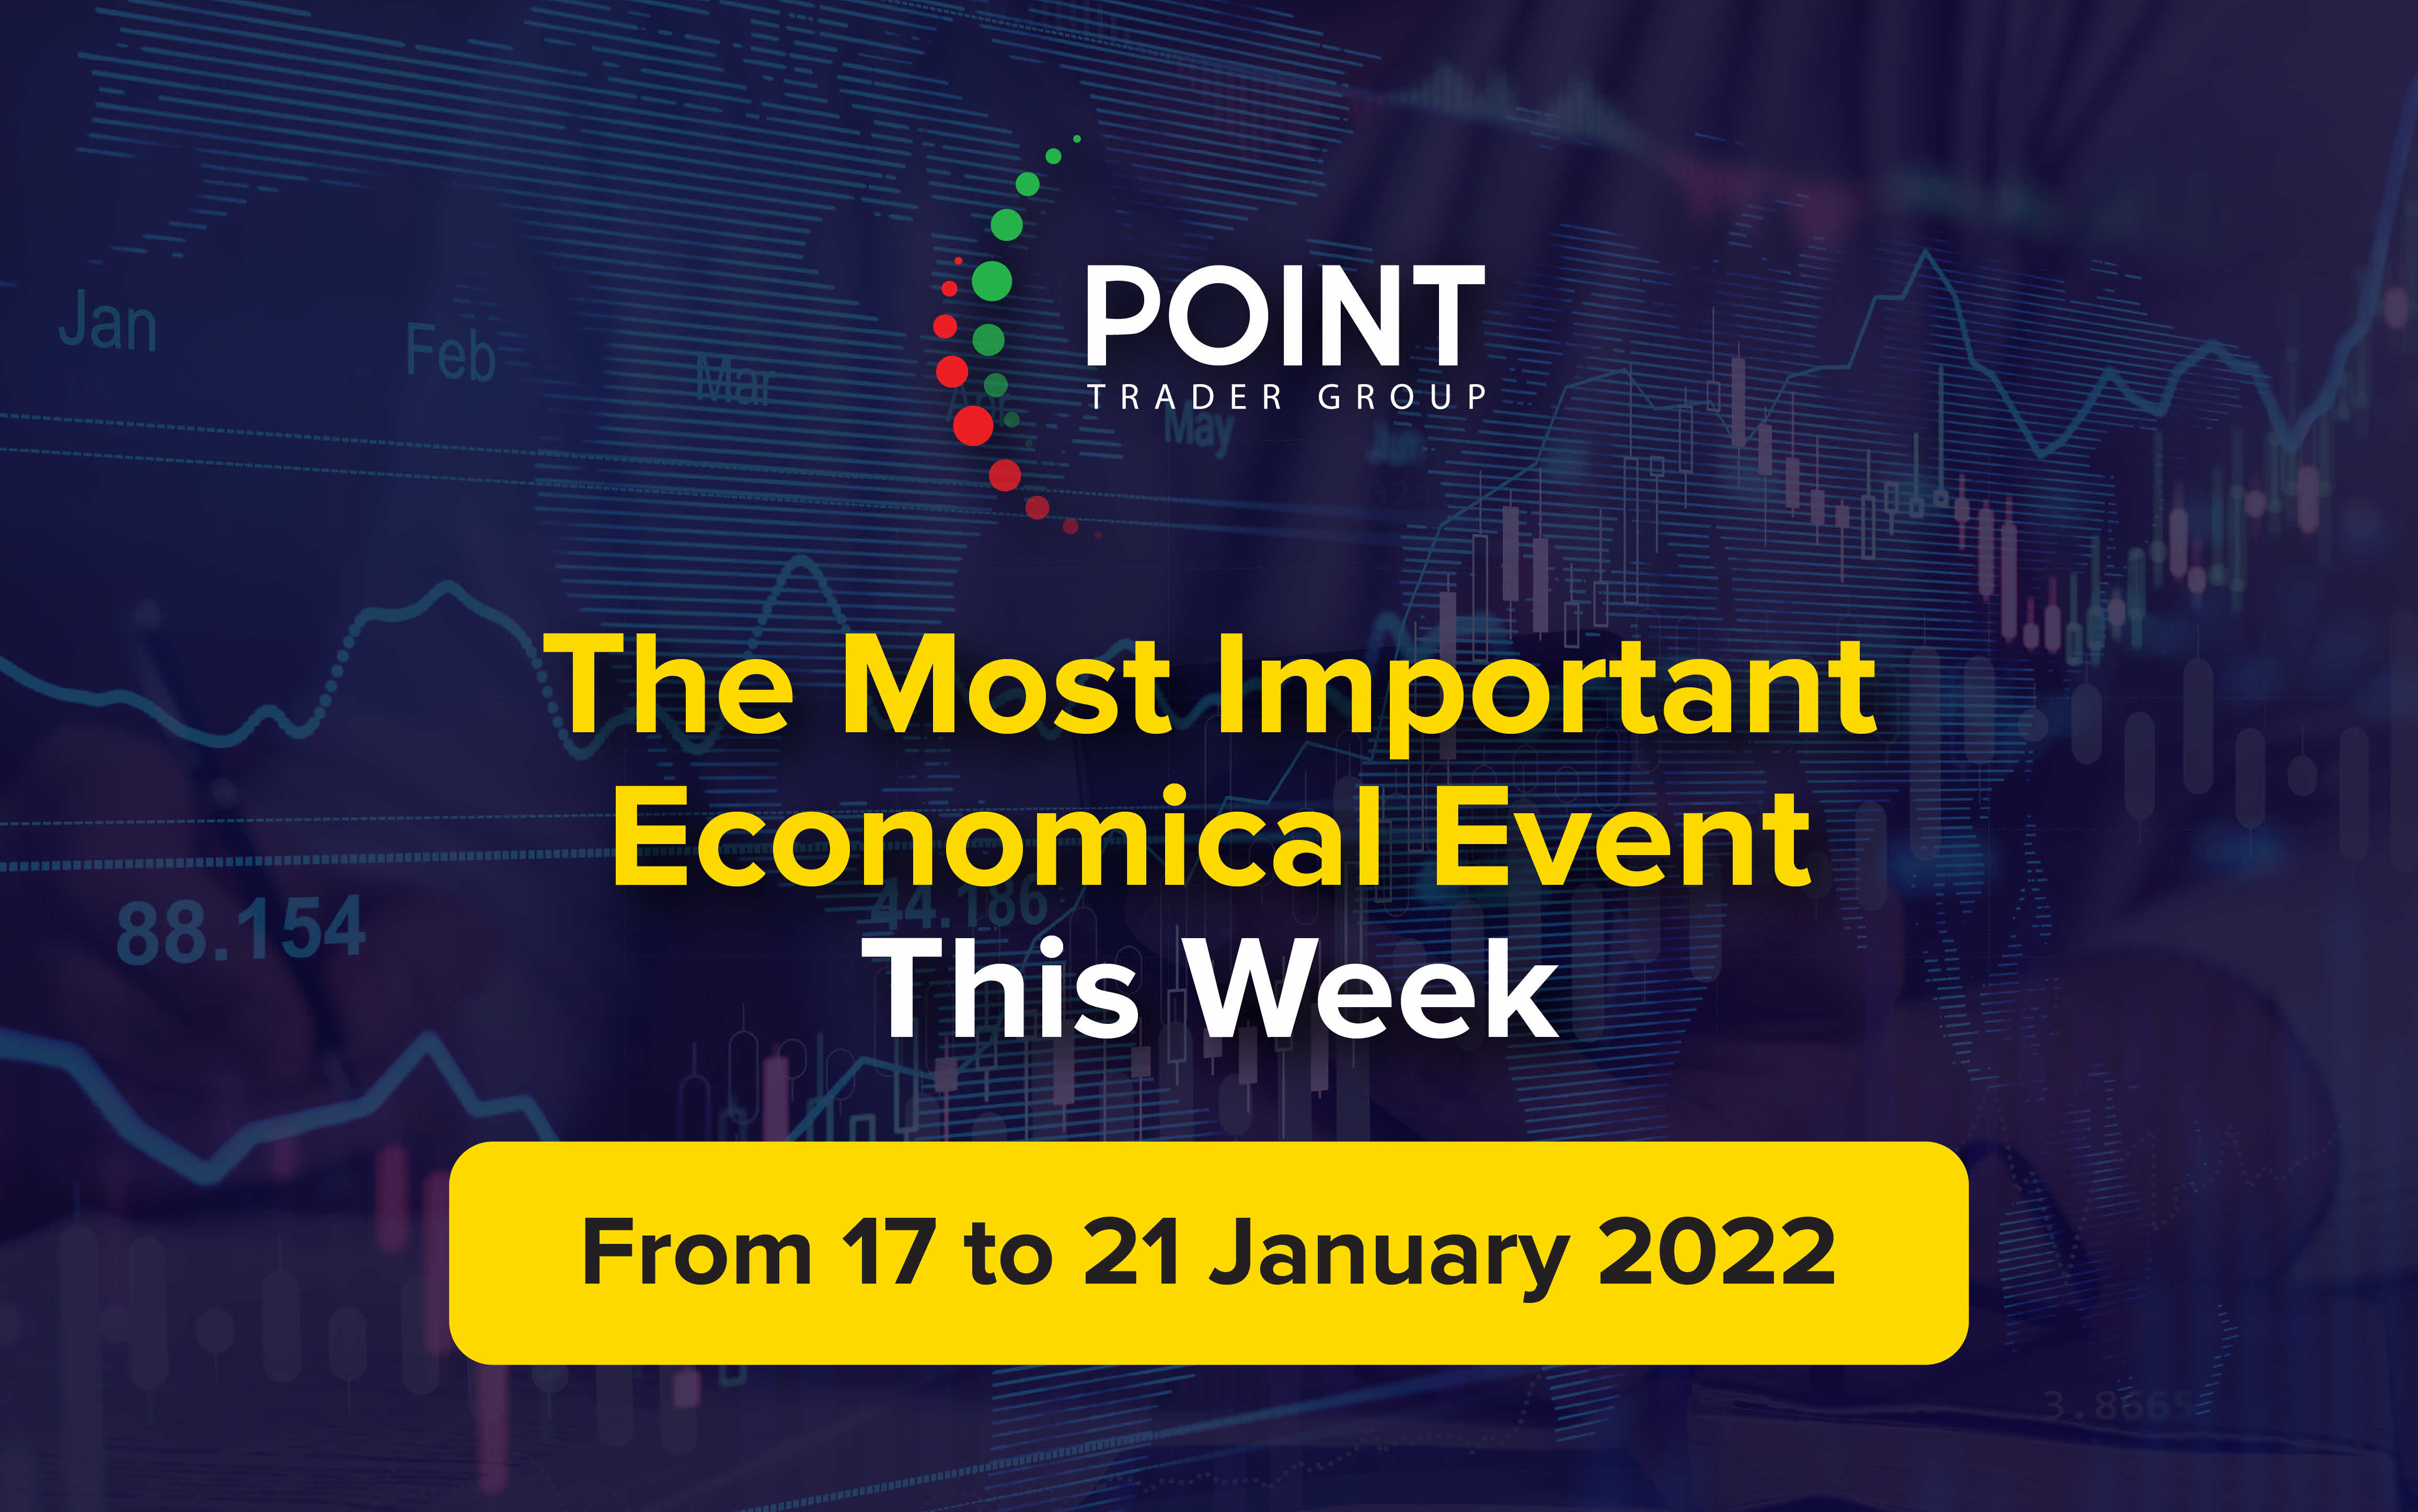 The most important Economic events this week from 17.01 to 21.01.2022